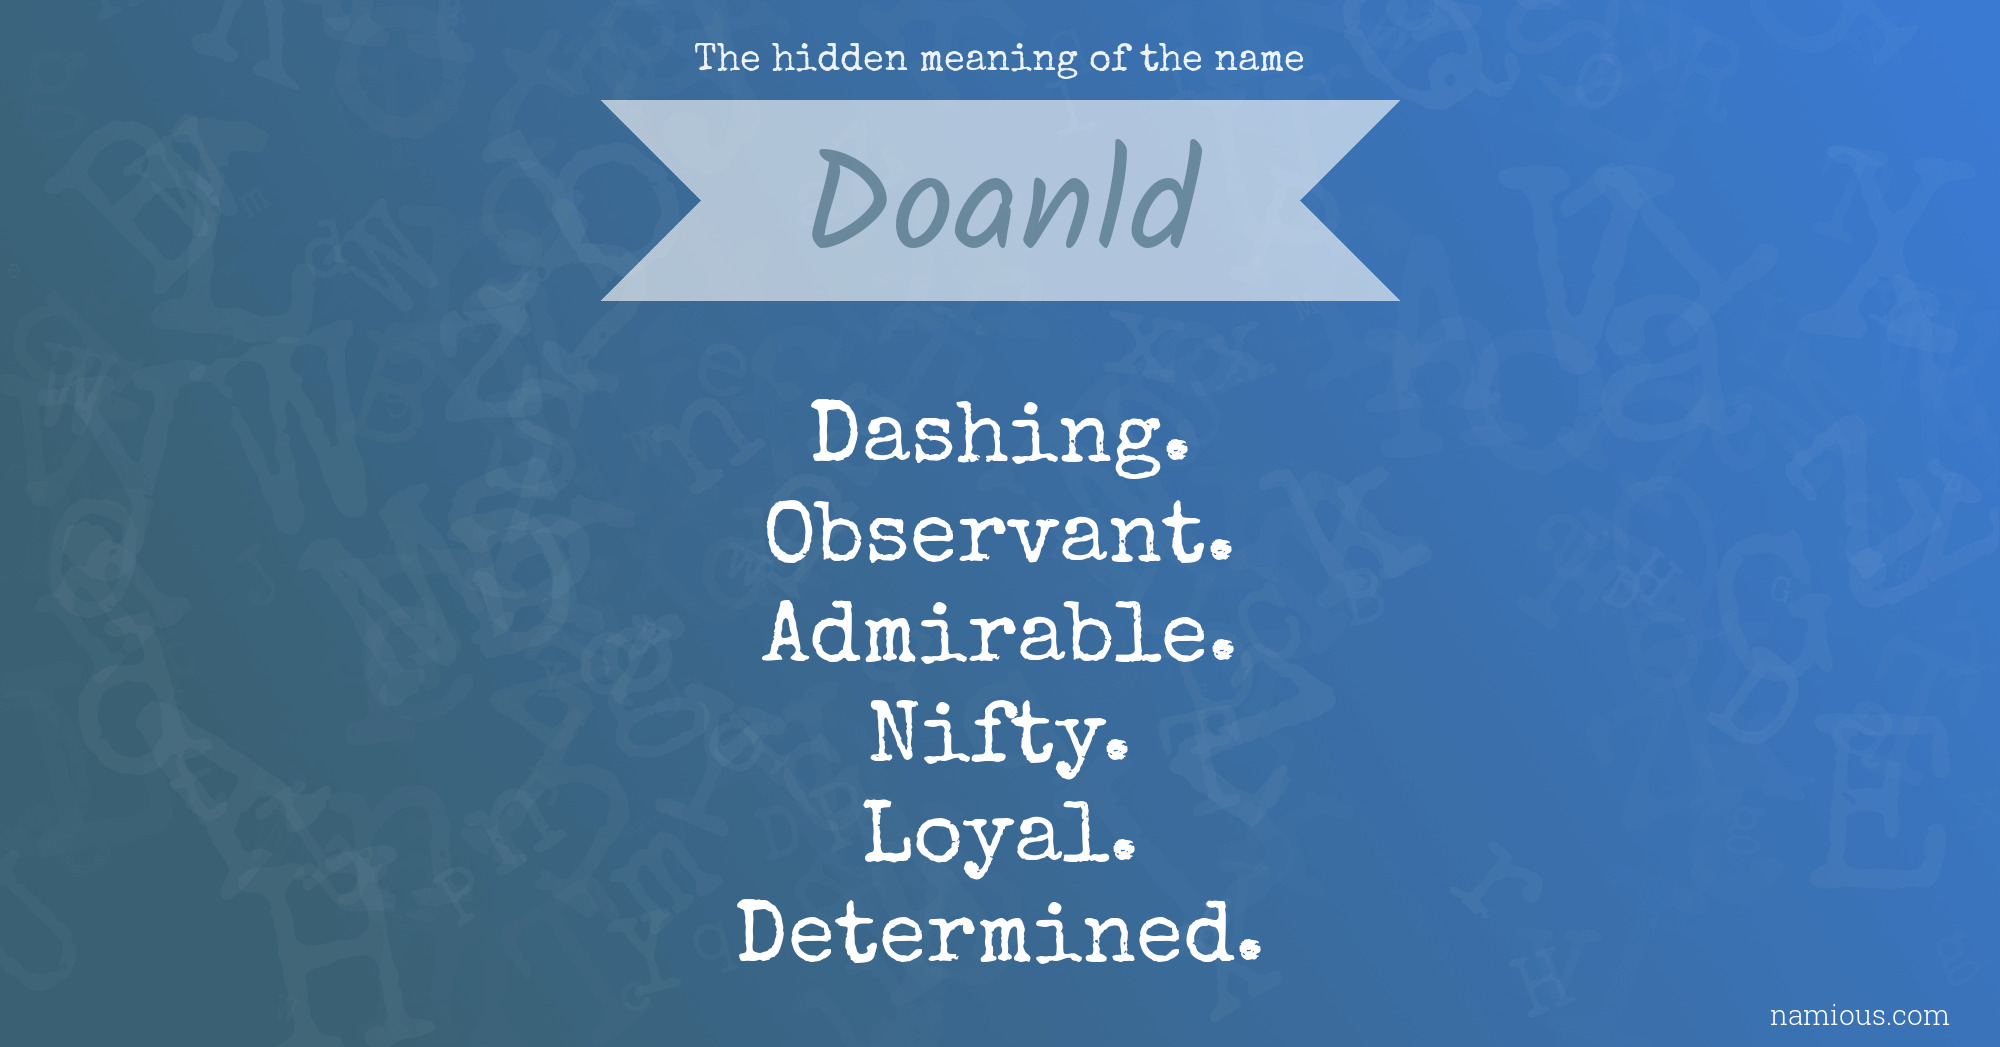 The hidden meaning of the name Doanld